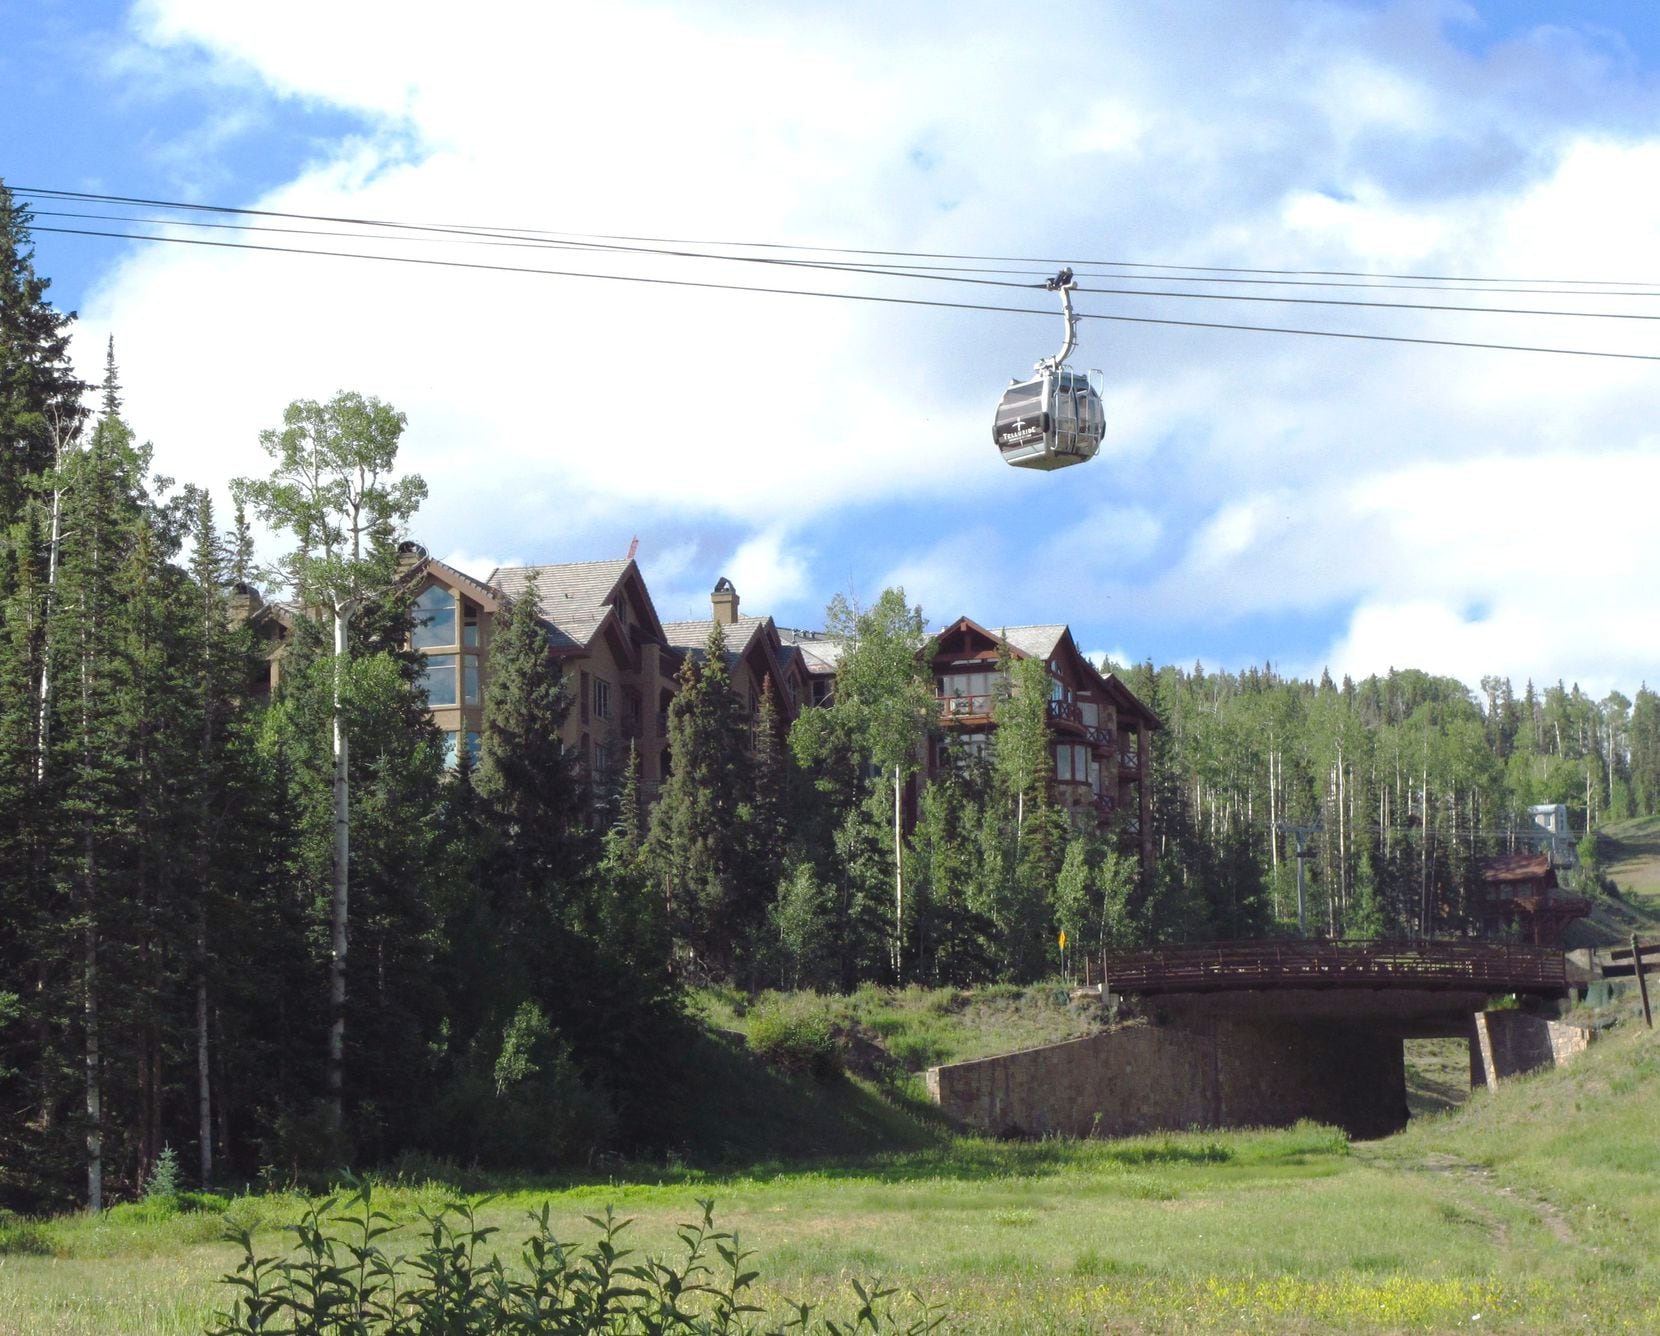 An innovative gondola system provides continuous free transportation between Telluride and...